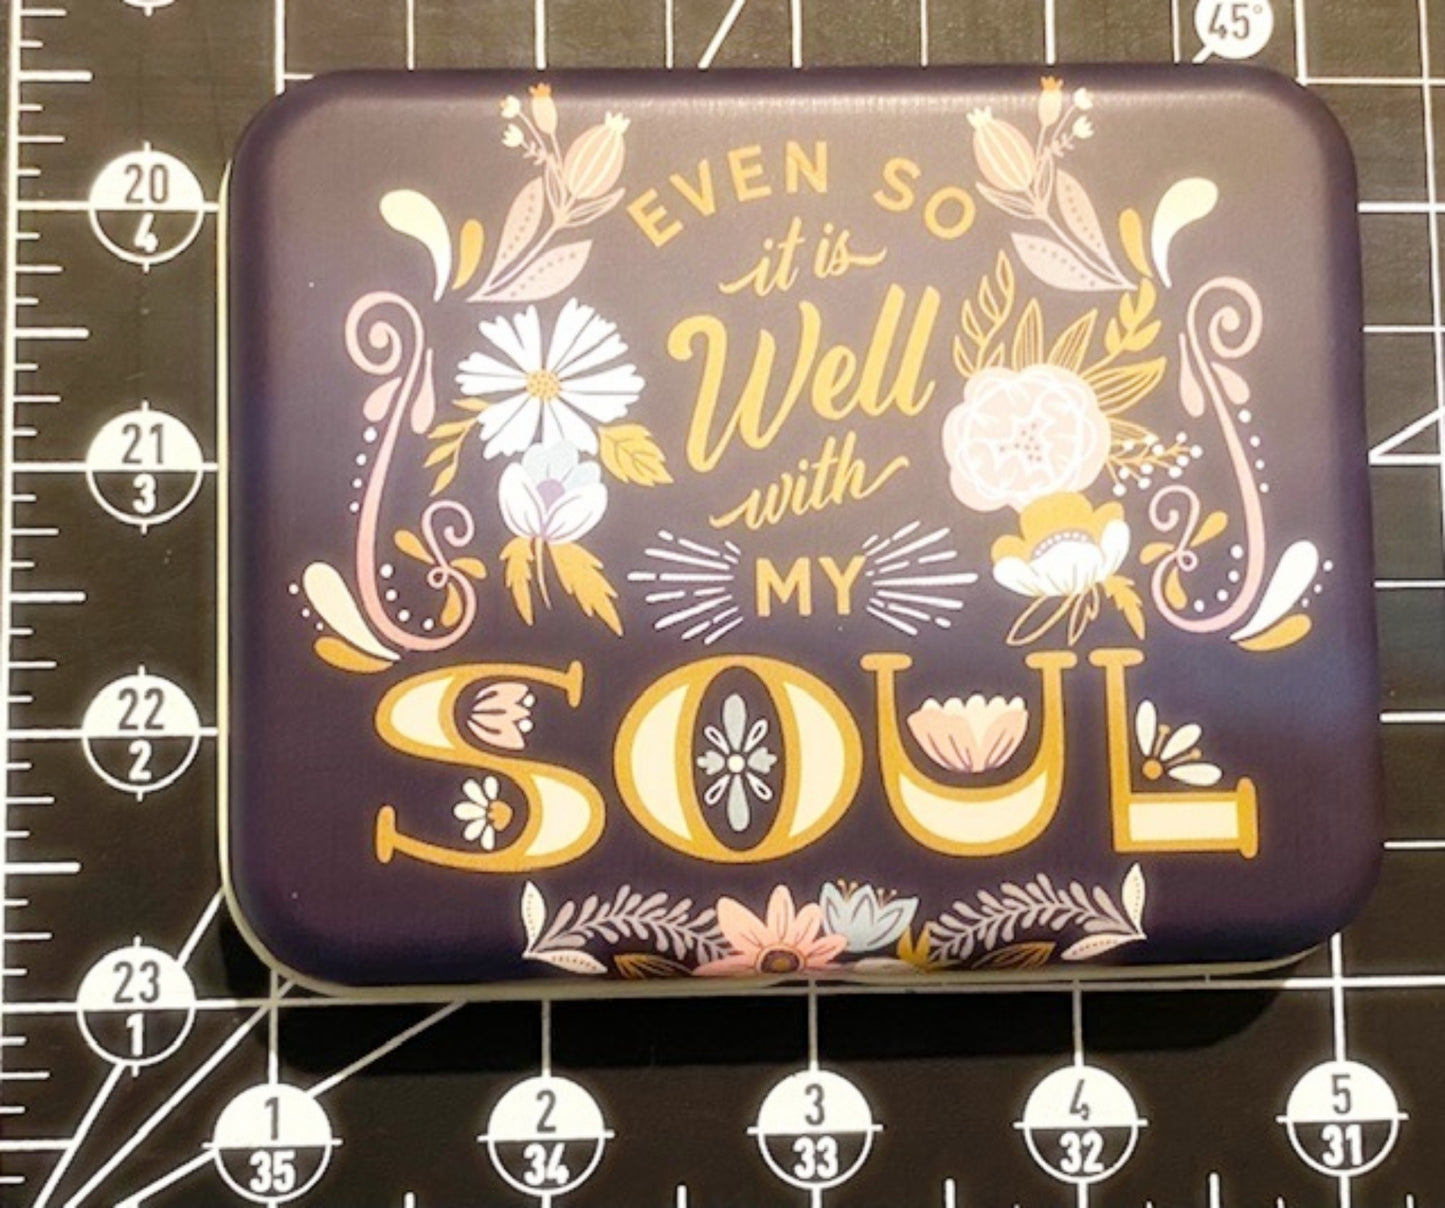 Even so it is Well with my Soul Tin Gift Storage